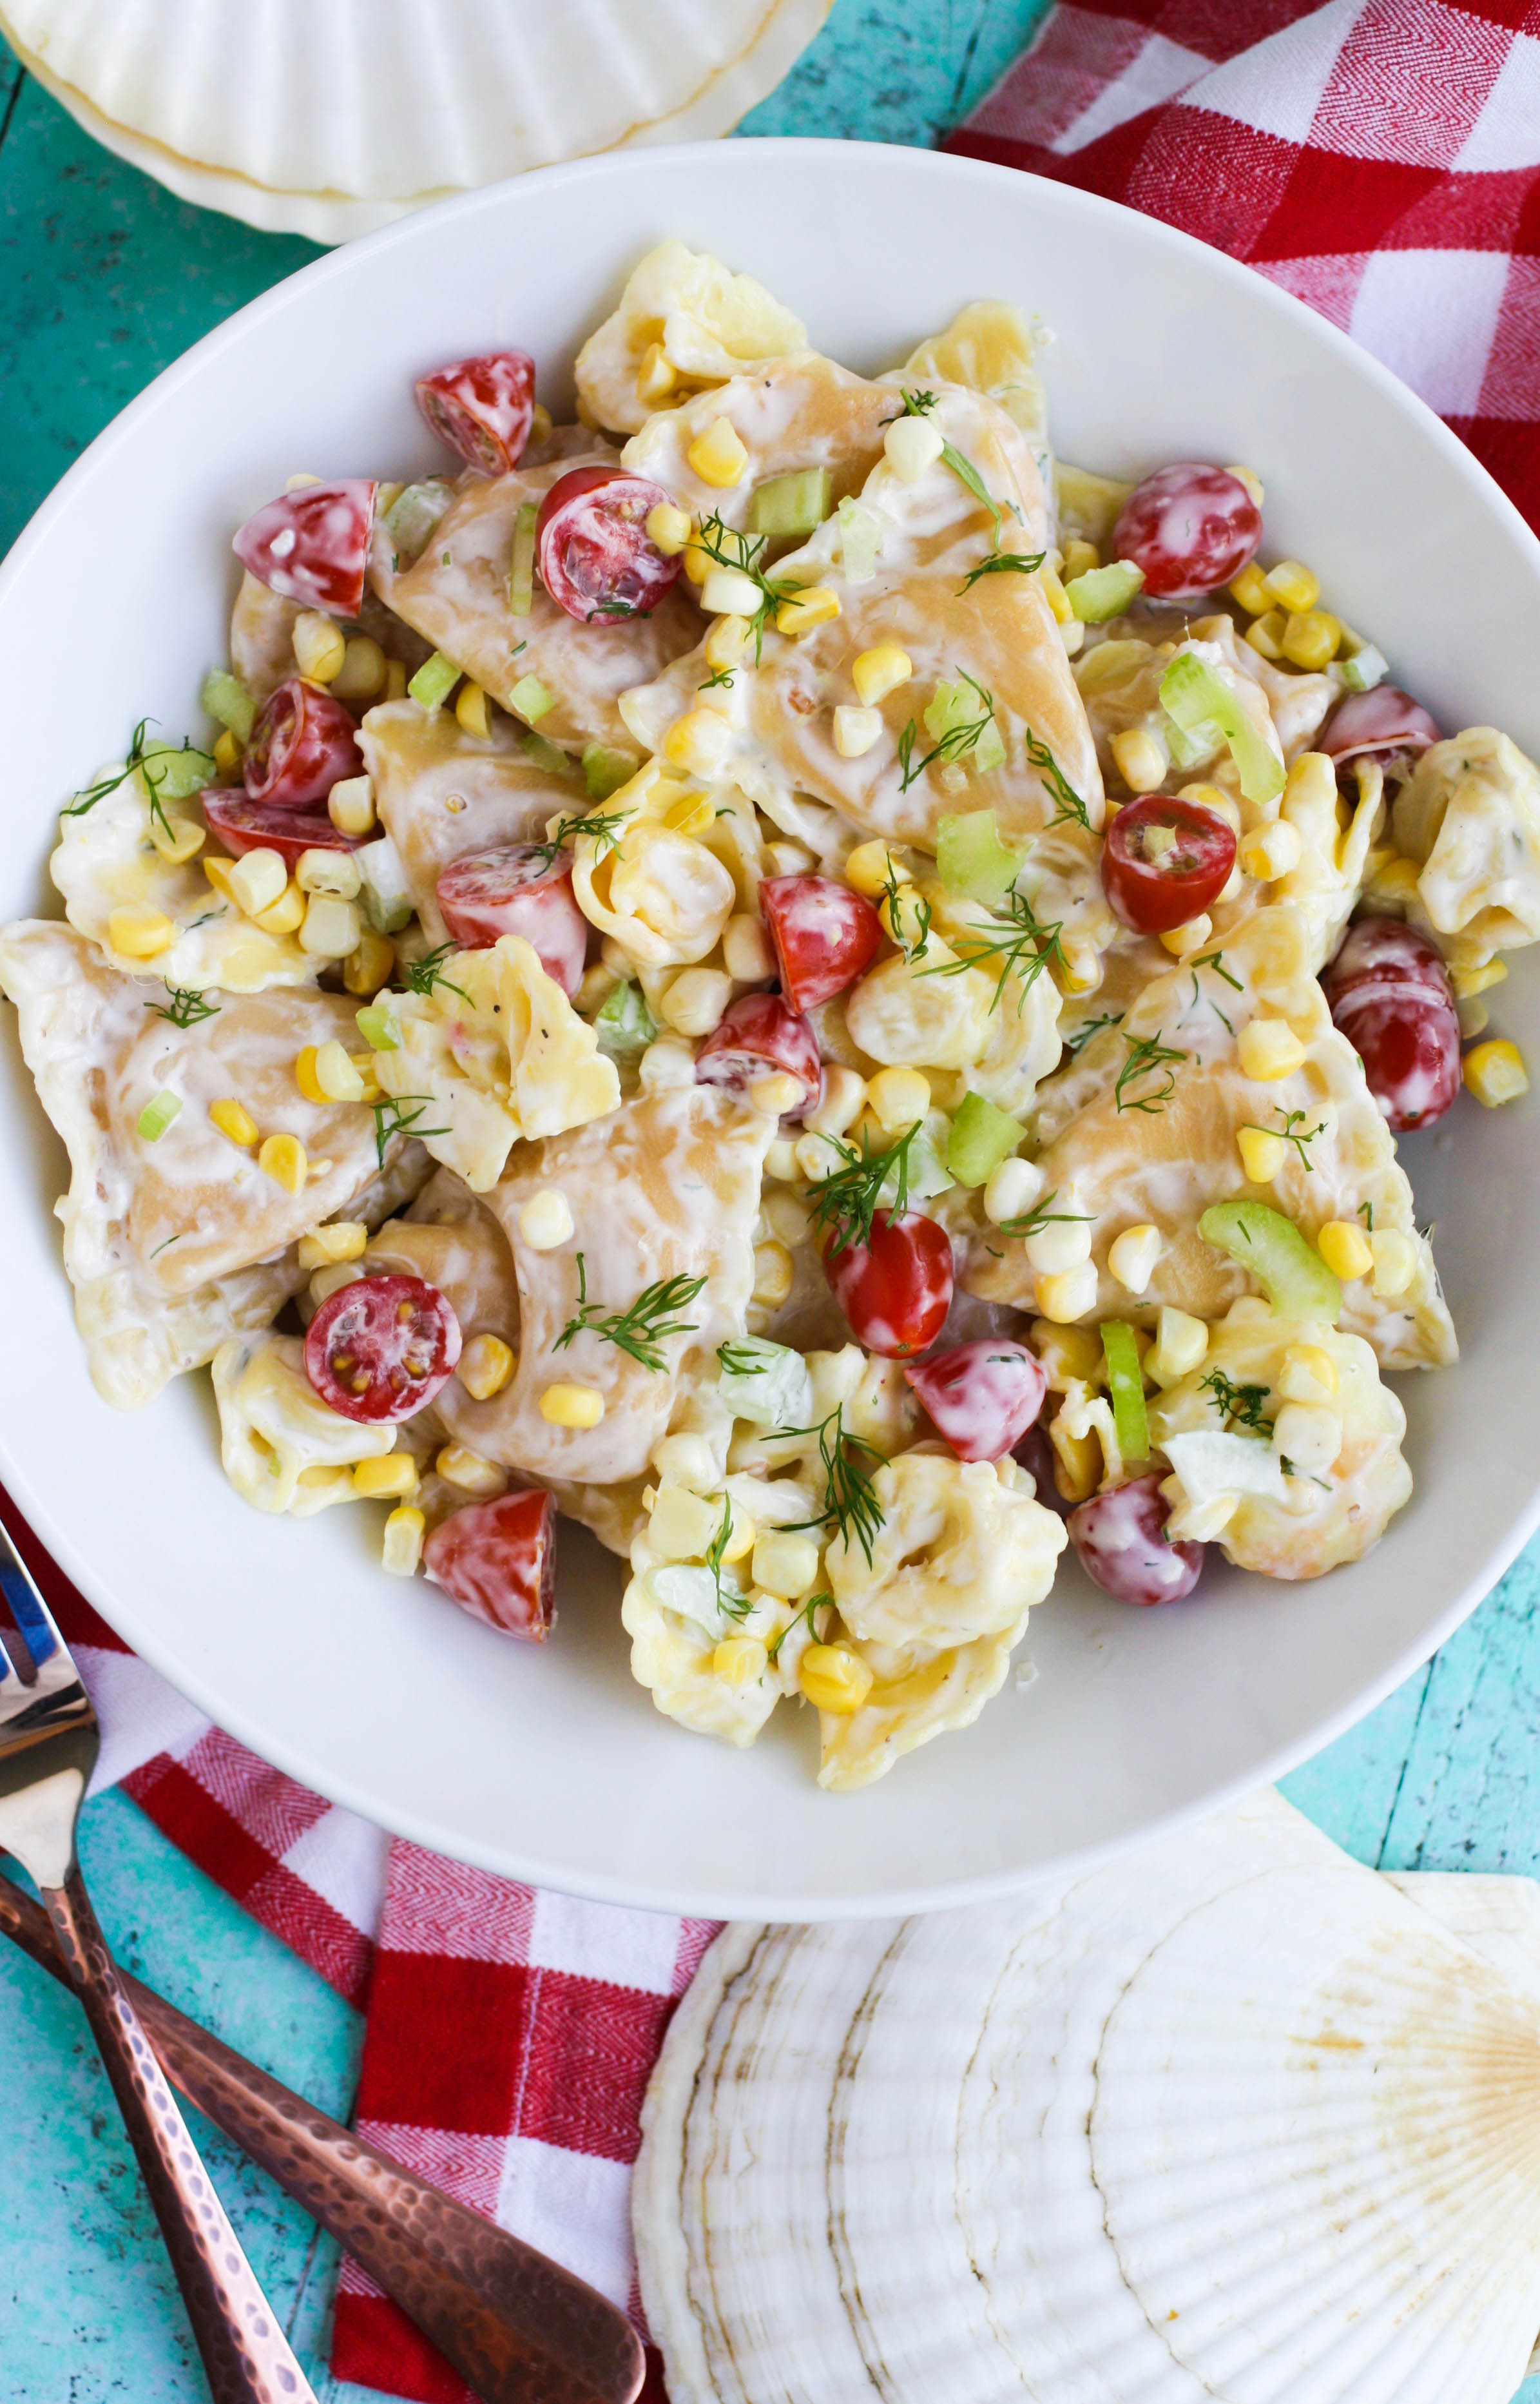 Lobster Ravioli Pasta Salad with Creamy Lemon Dressing is a dish to make this summer. Lobster Ravioli Pasta Salad with Creamy Lemon Dressing is a rich and fantastic summer dish.